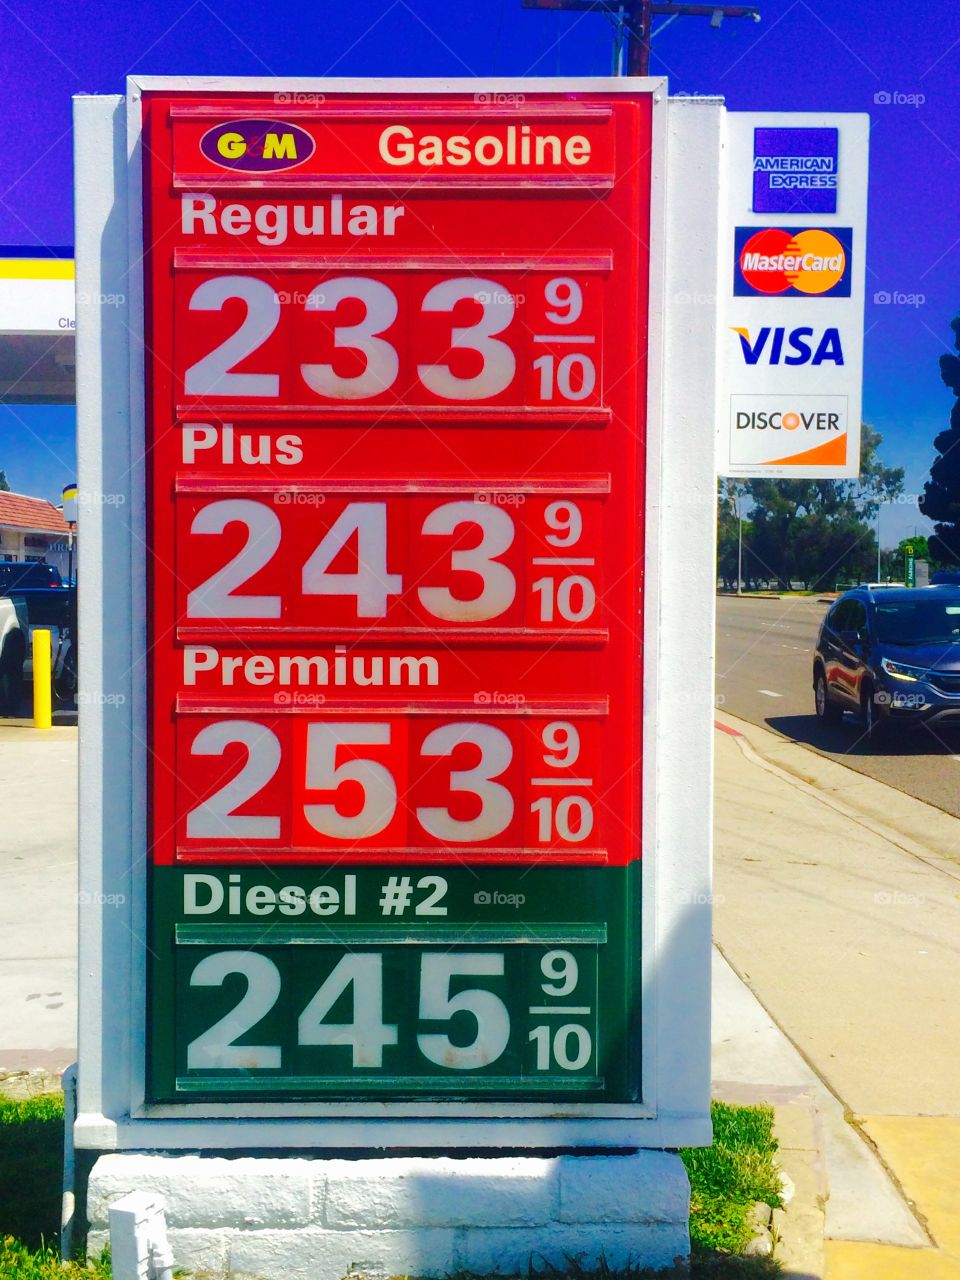 Low gas price in CA